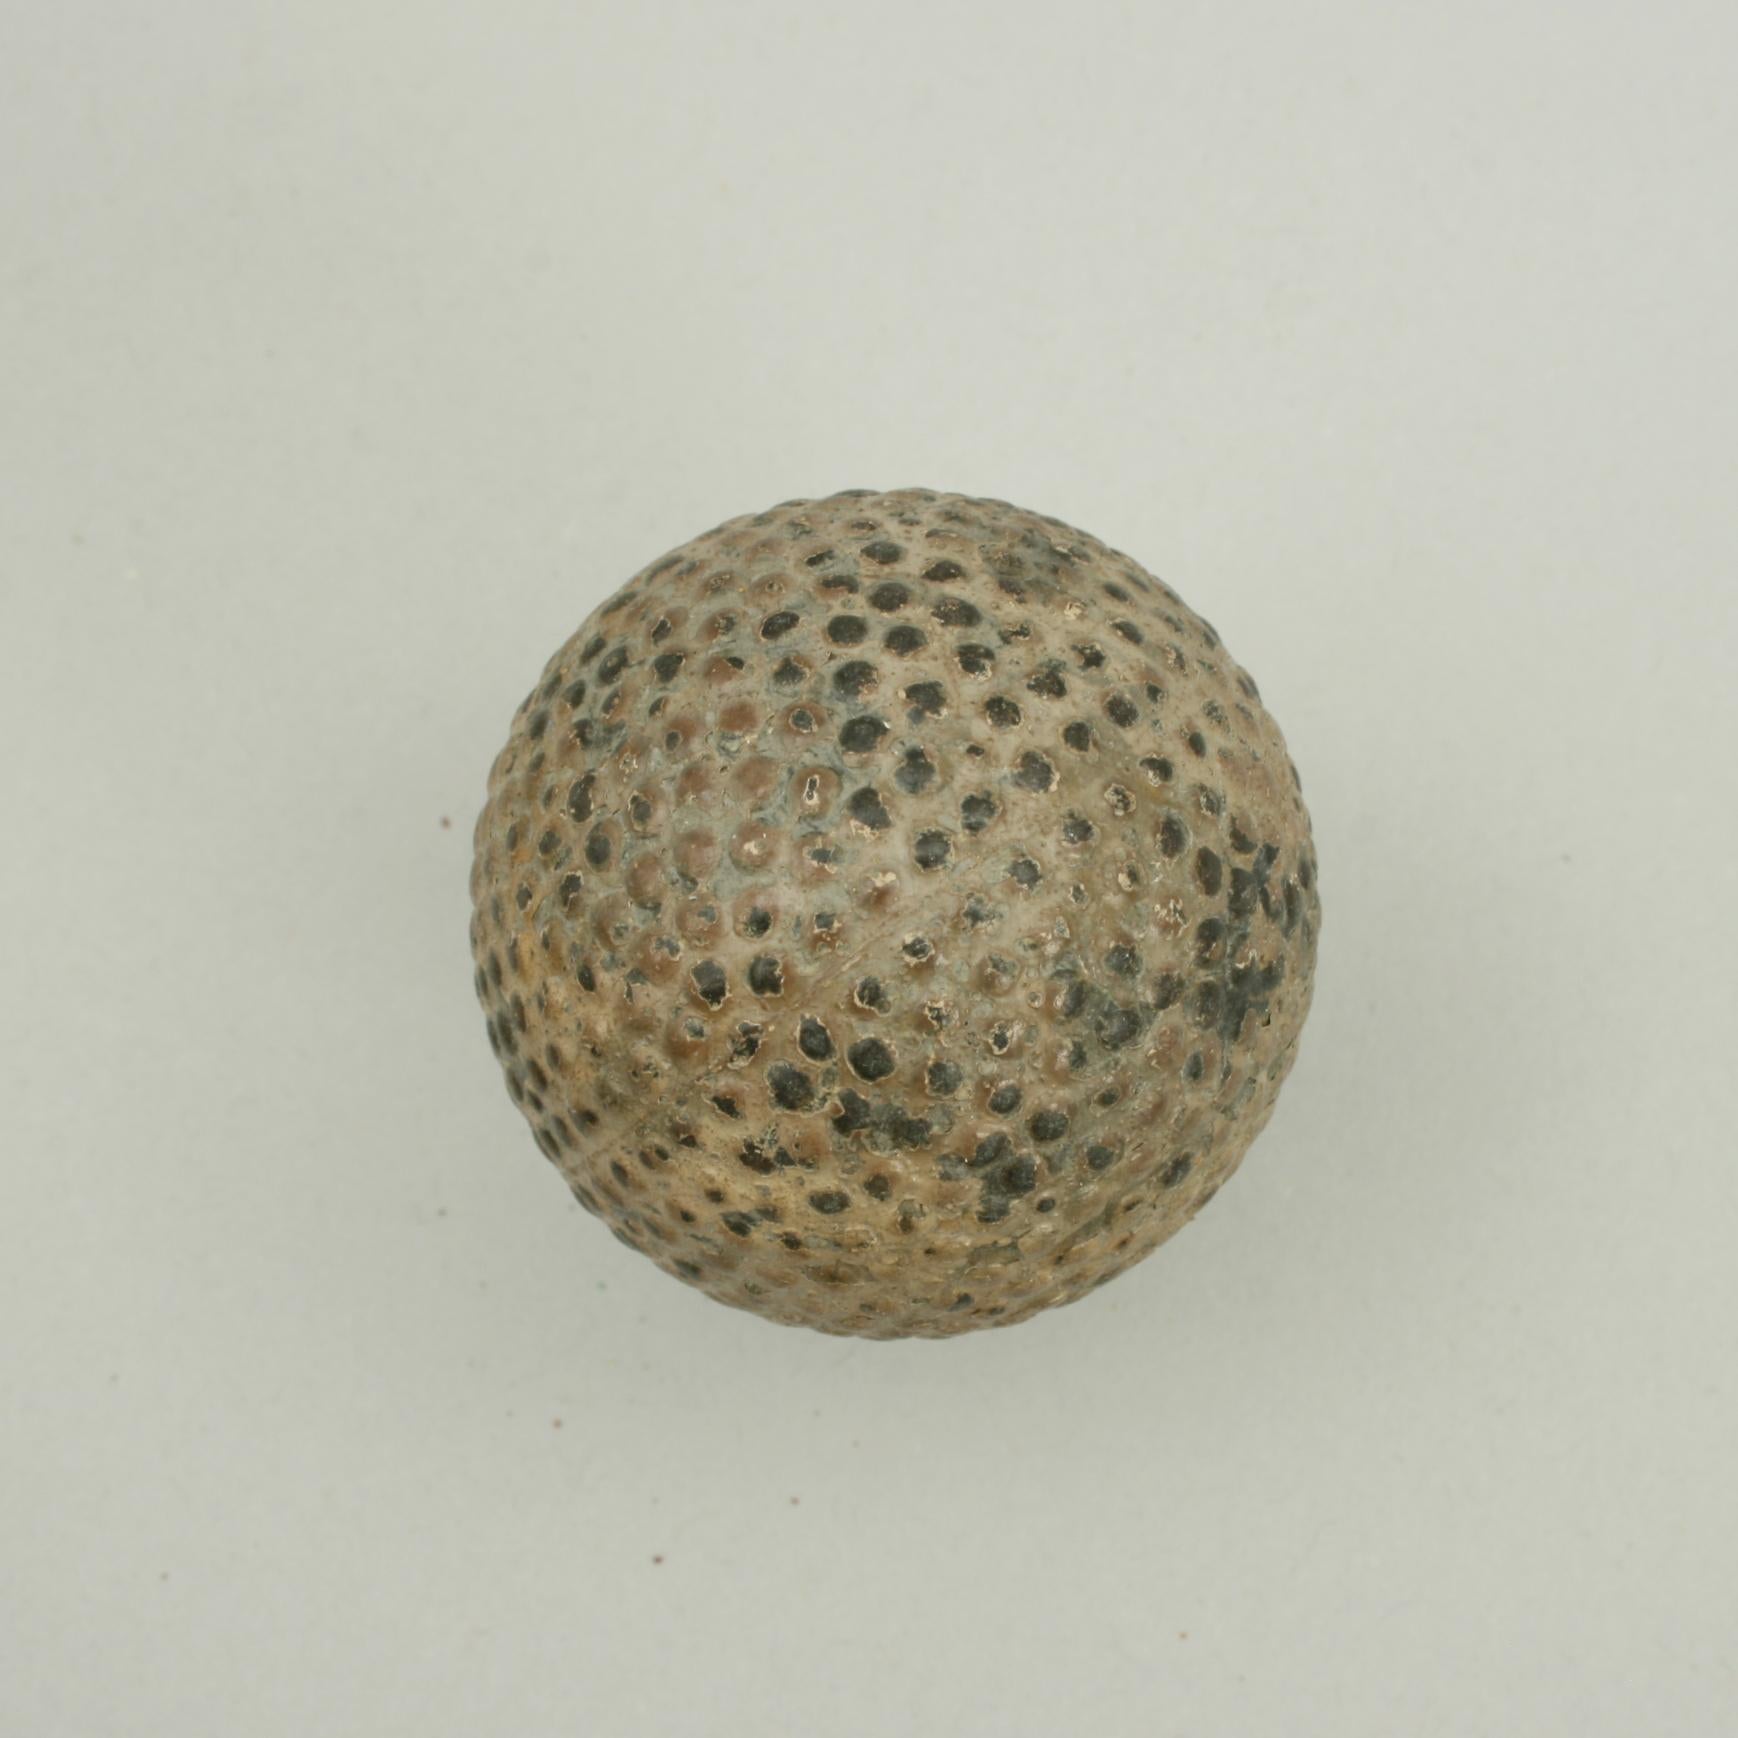 'The Kiddy' Bramble golf ball.
A bramble patterned rubber core golf ball made by Wood-Milne Ltd. The ball is marked on both poles 'The Kiddy' on one and 'Wood-Milne' on the other. This is a good classic bramble pattern, raised dimples, golf ball